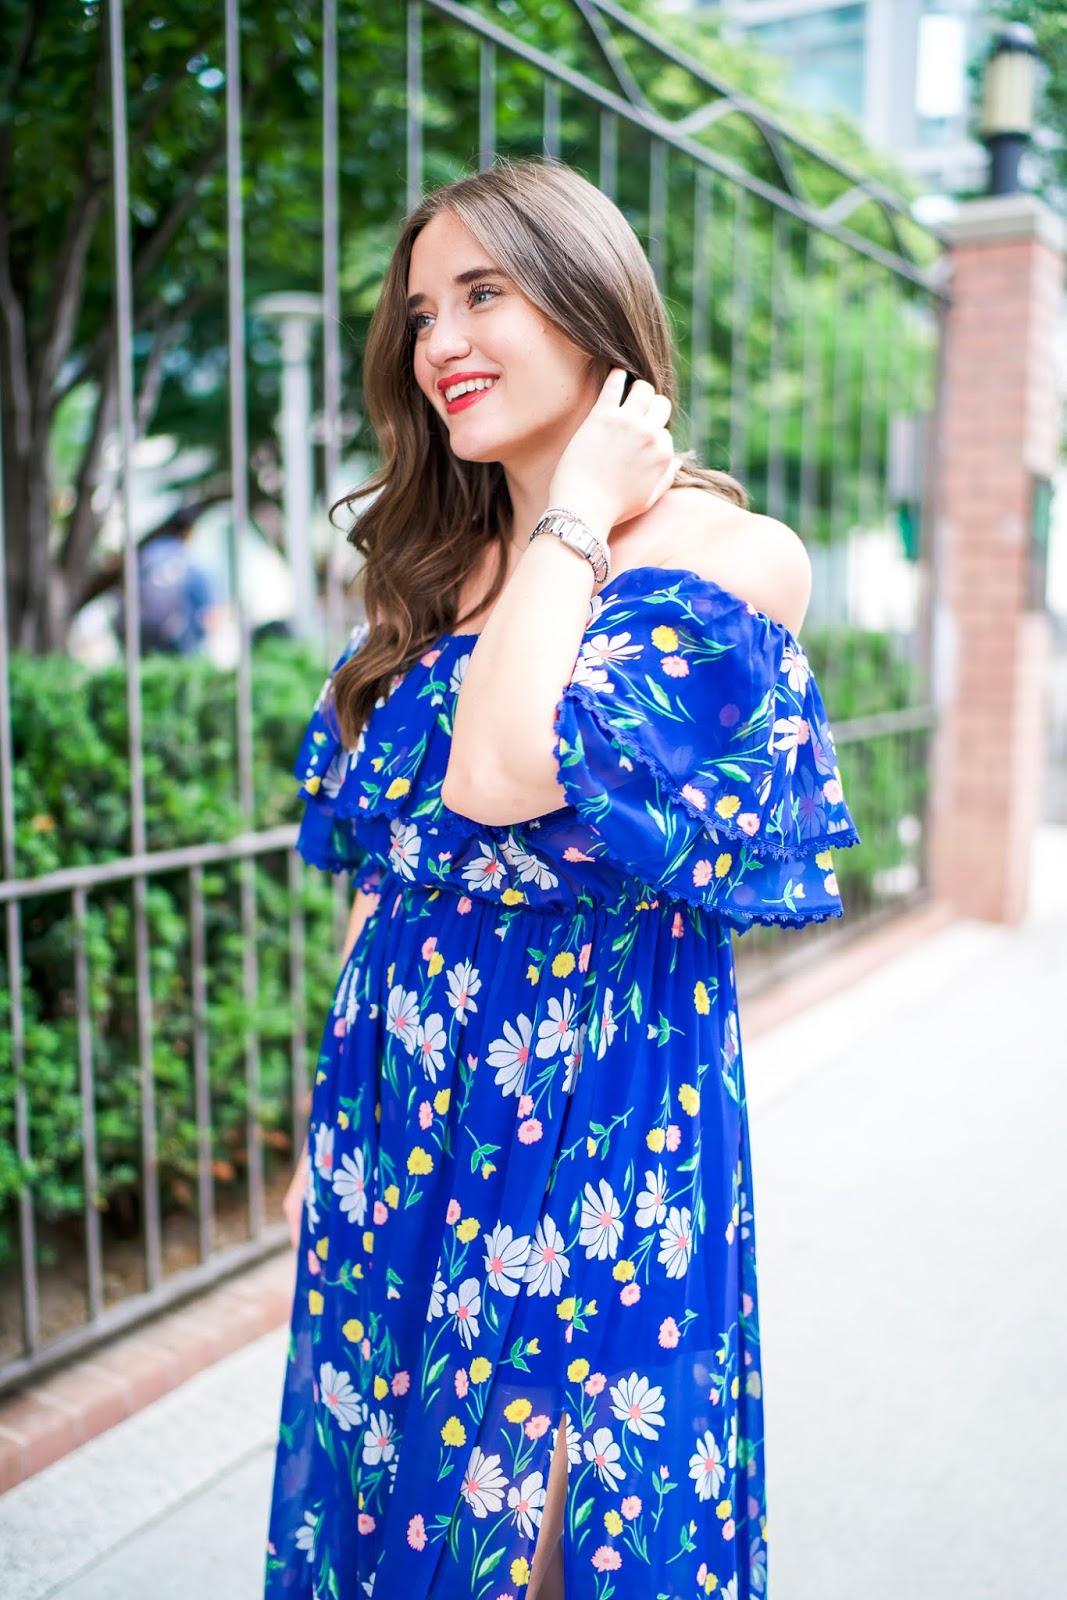 Topshop floral maxi dress styled by popular New York fashion blogger, Covering the Bases